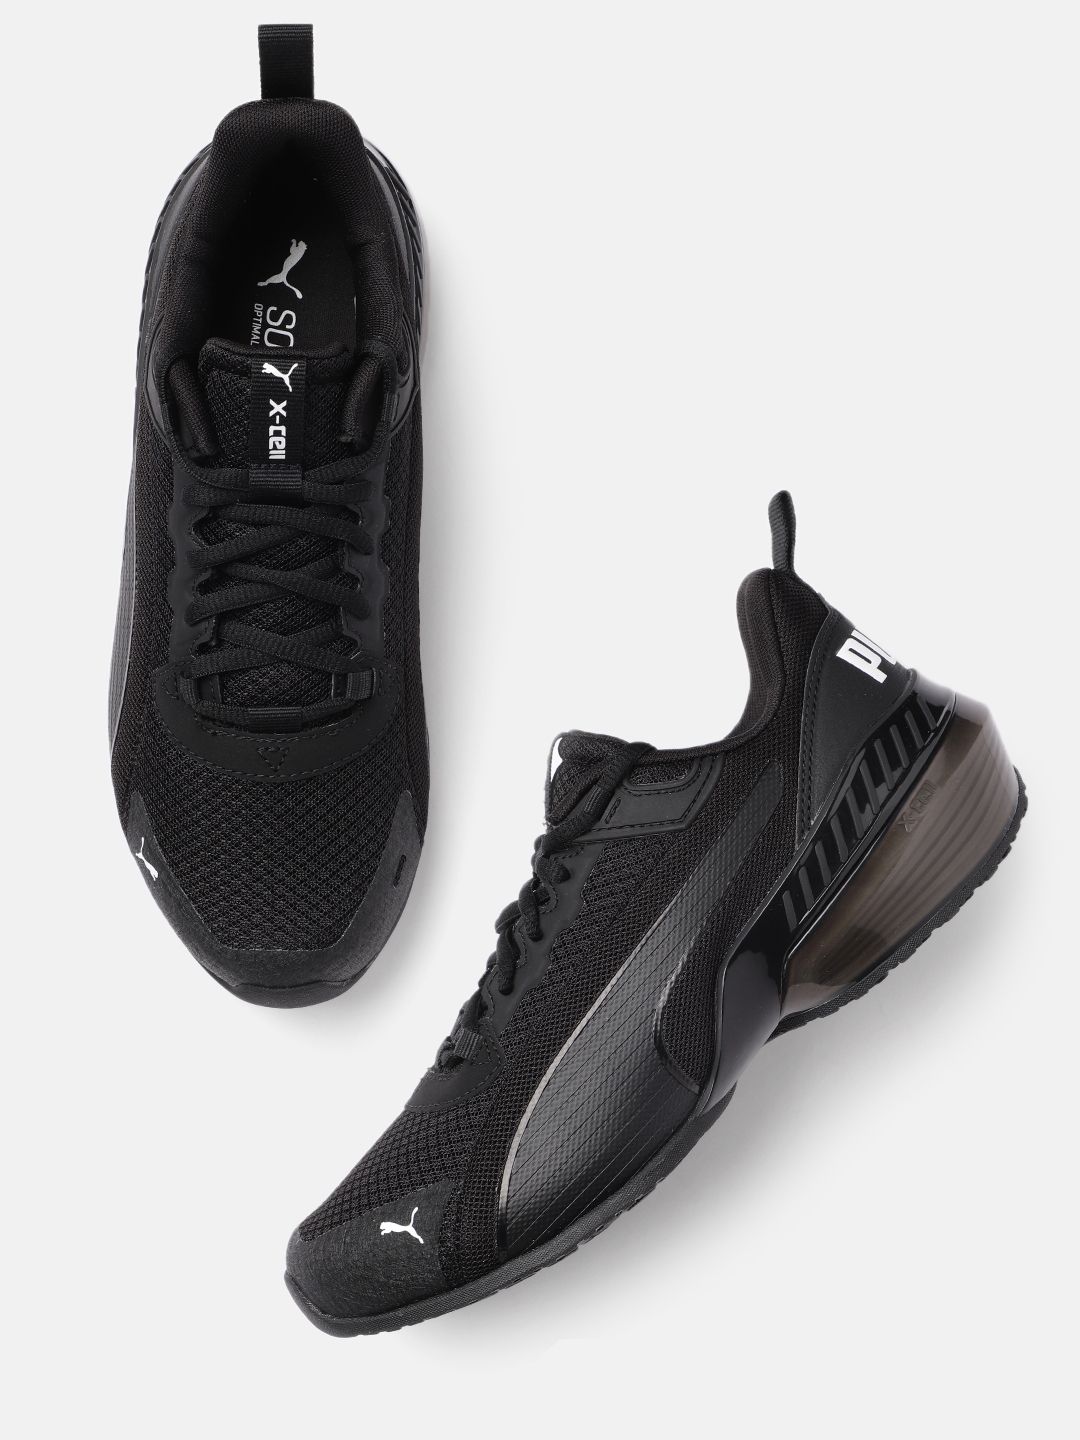 Puma Unisex Black X-Cell Uprise Fade Running Shoes Price in India